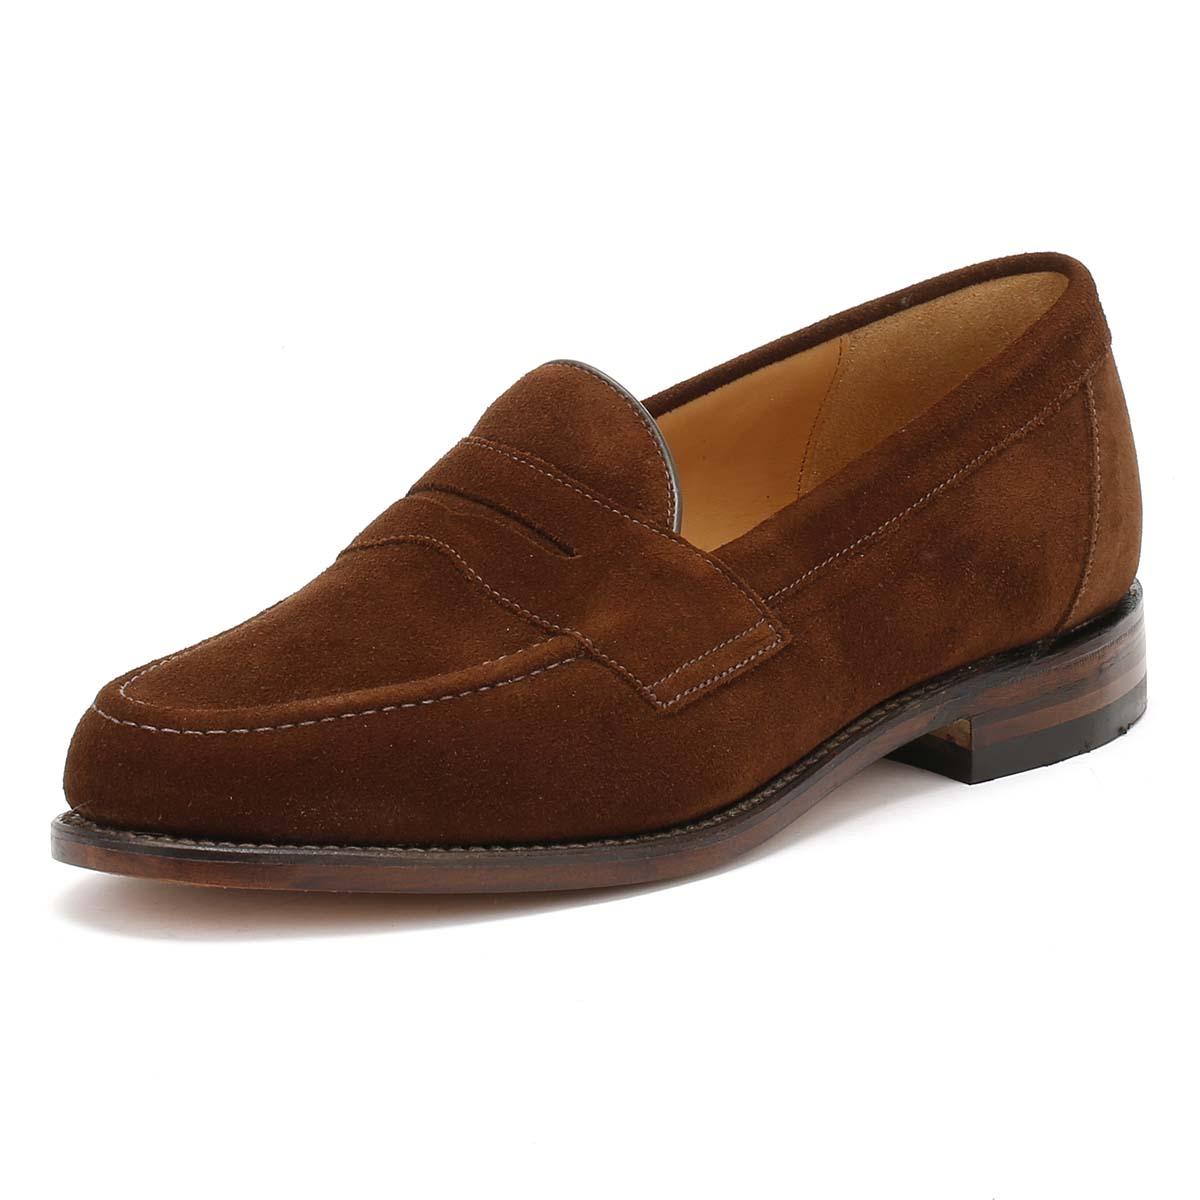 Loake Eton Mens Tobacco Suede Loafers in Brown for Men - Lyst